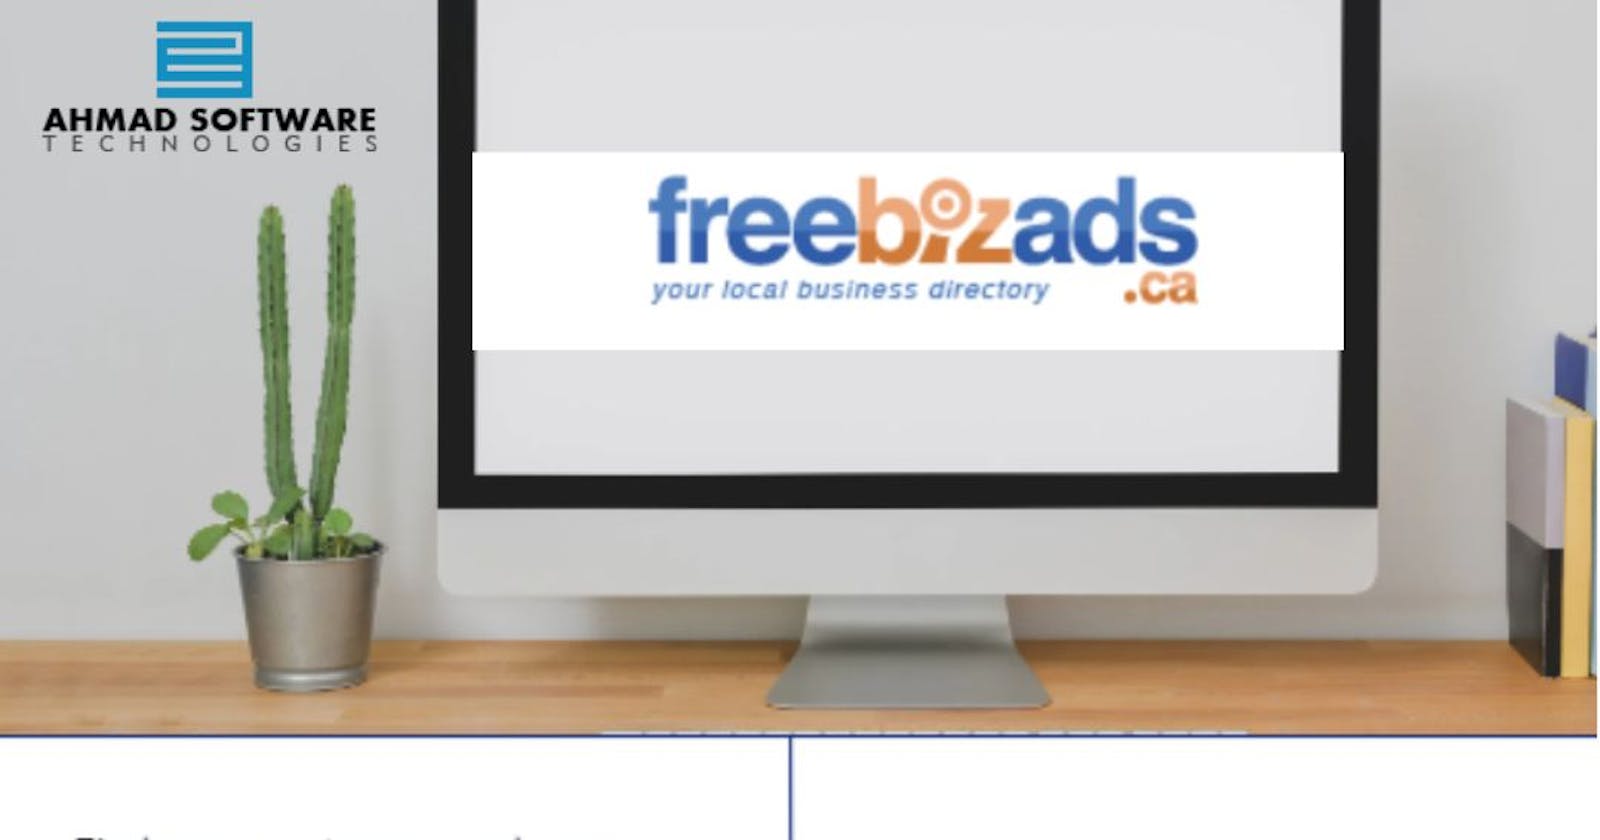 How To Extract Data From Freebizads.ca?